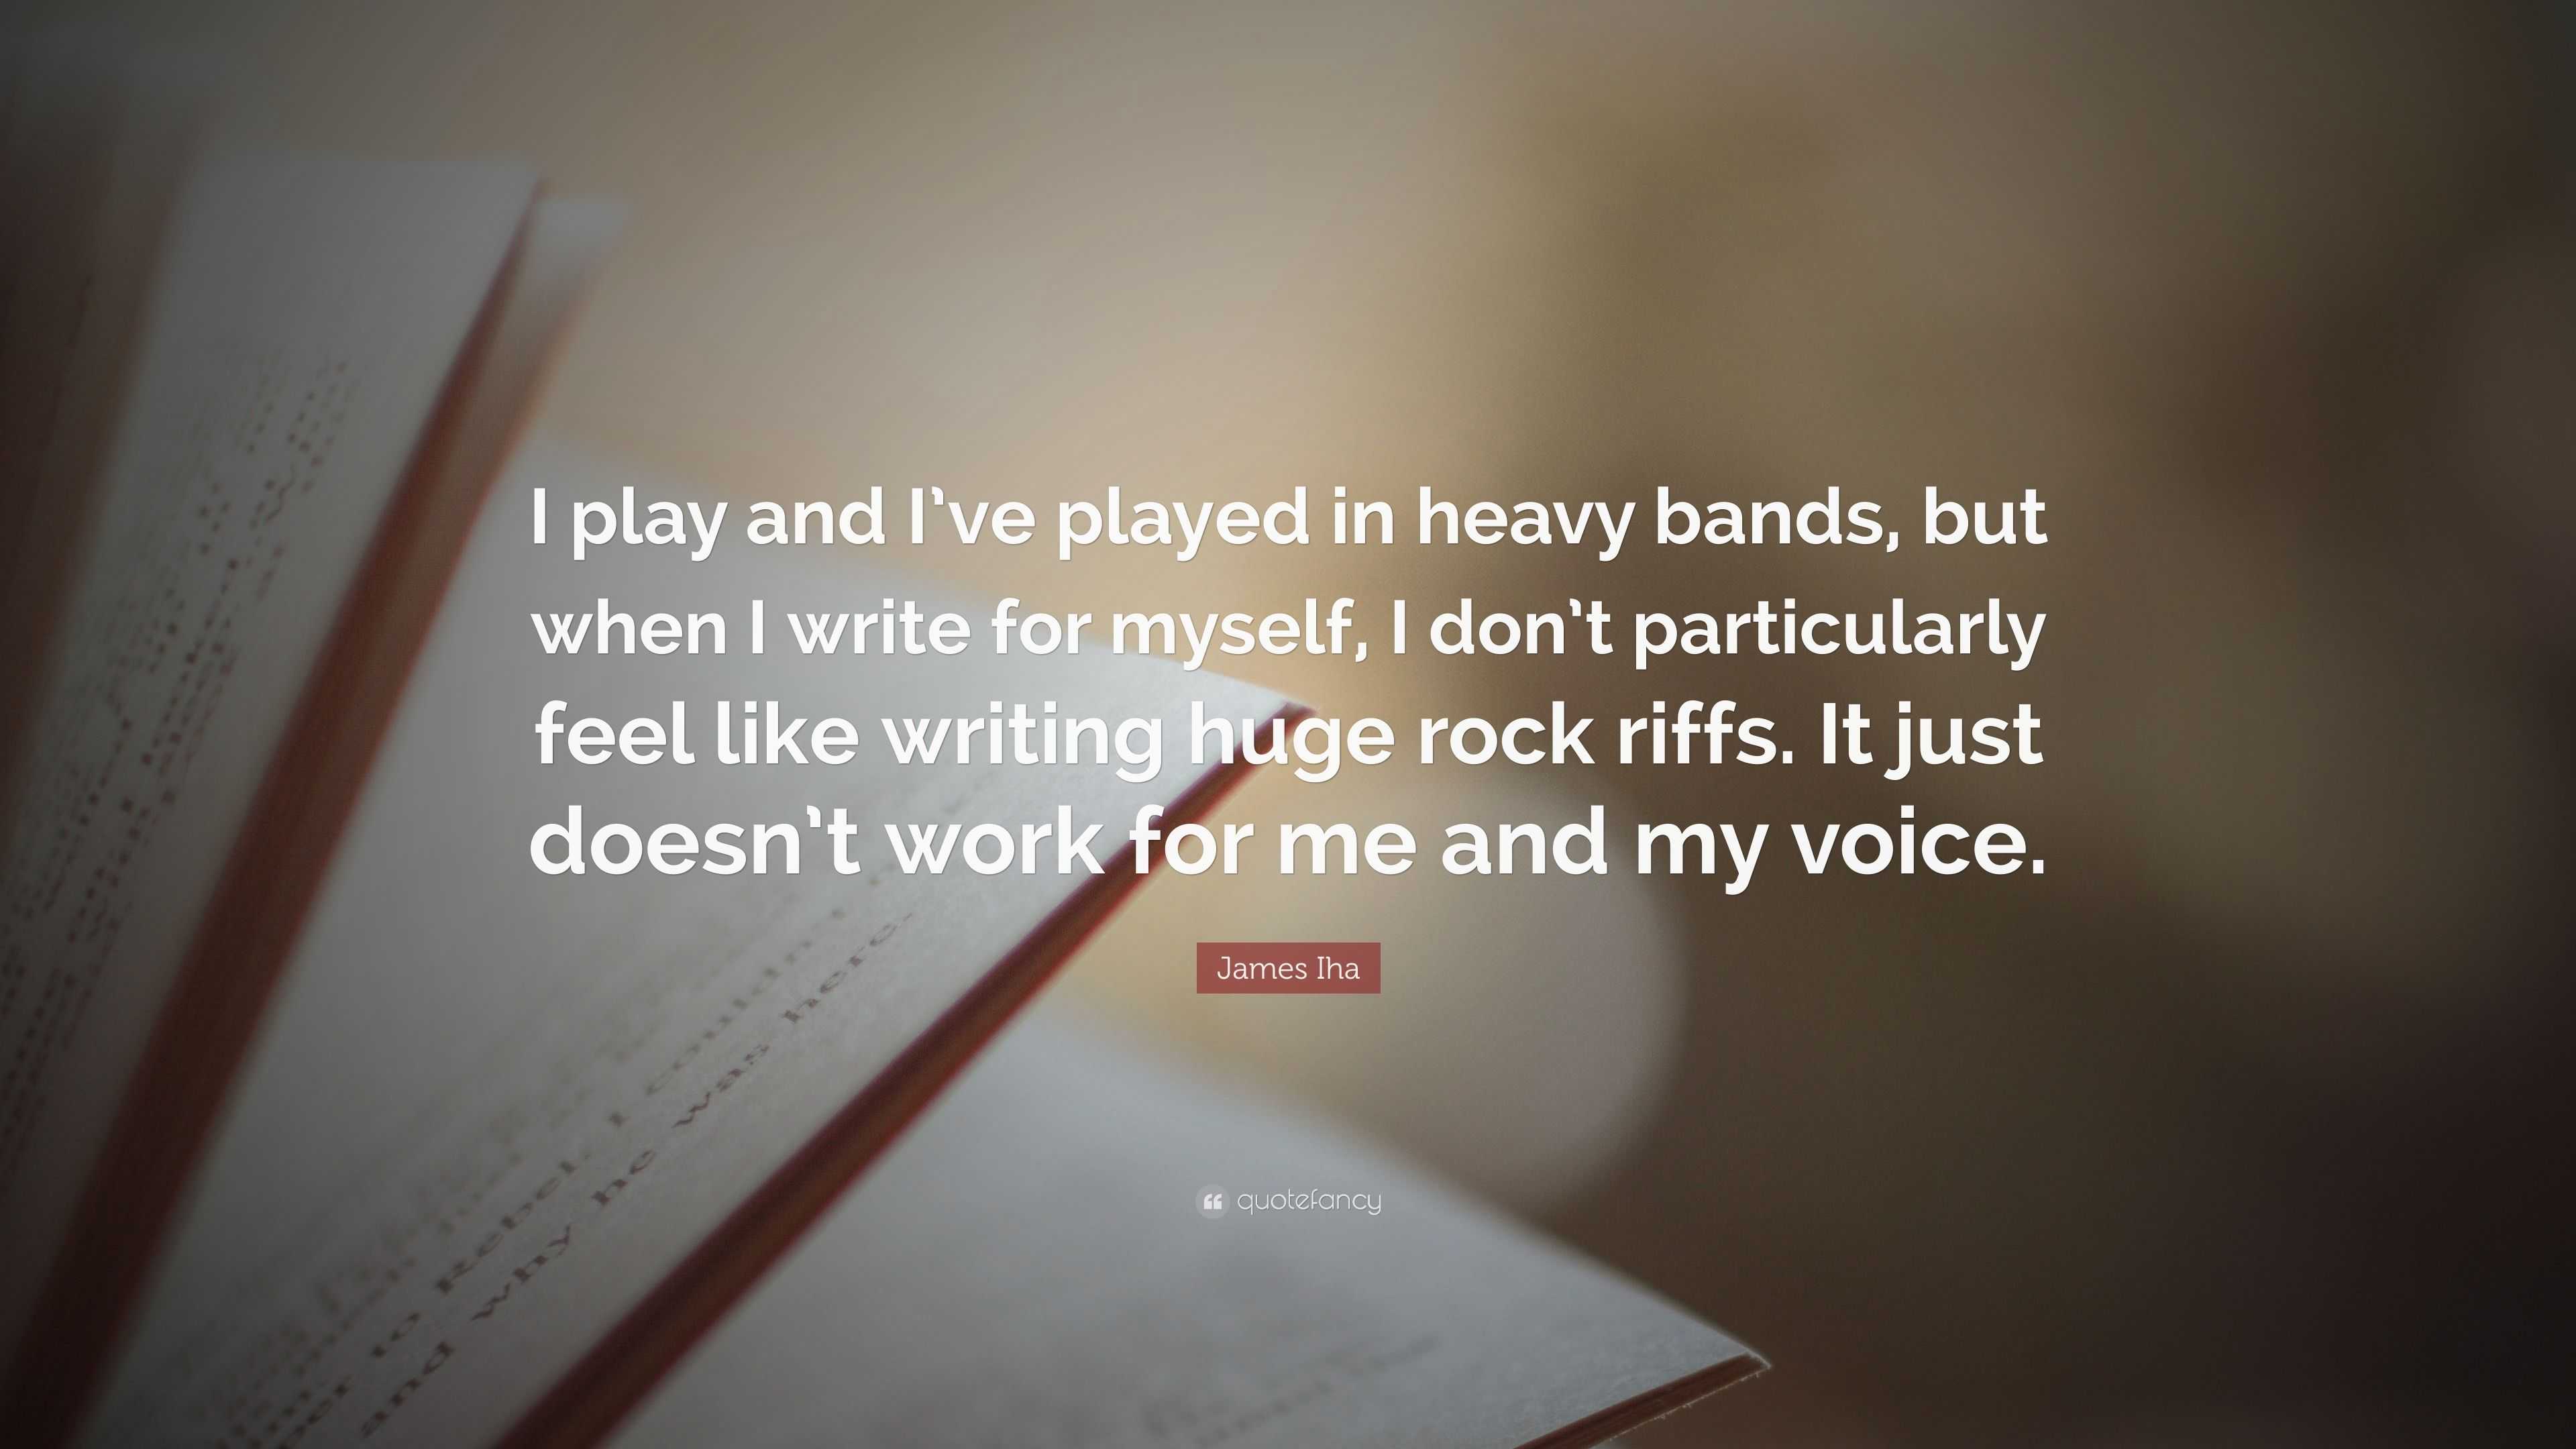 James Iha Quote: “I play and I've played in heavy bands, but when I write  for myself, I don't particularly feel like writing huge rock rif”